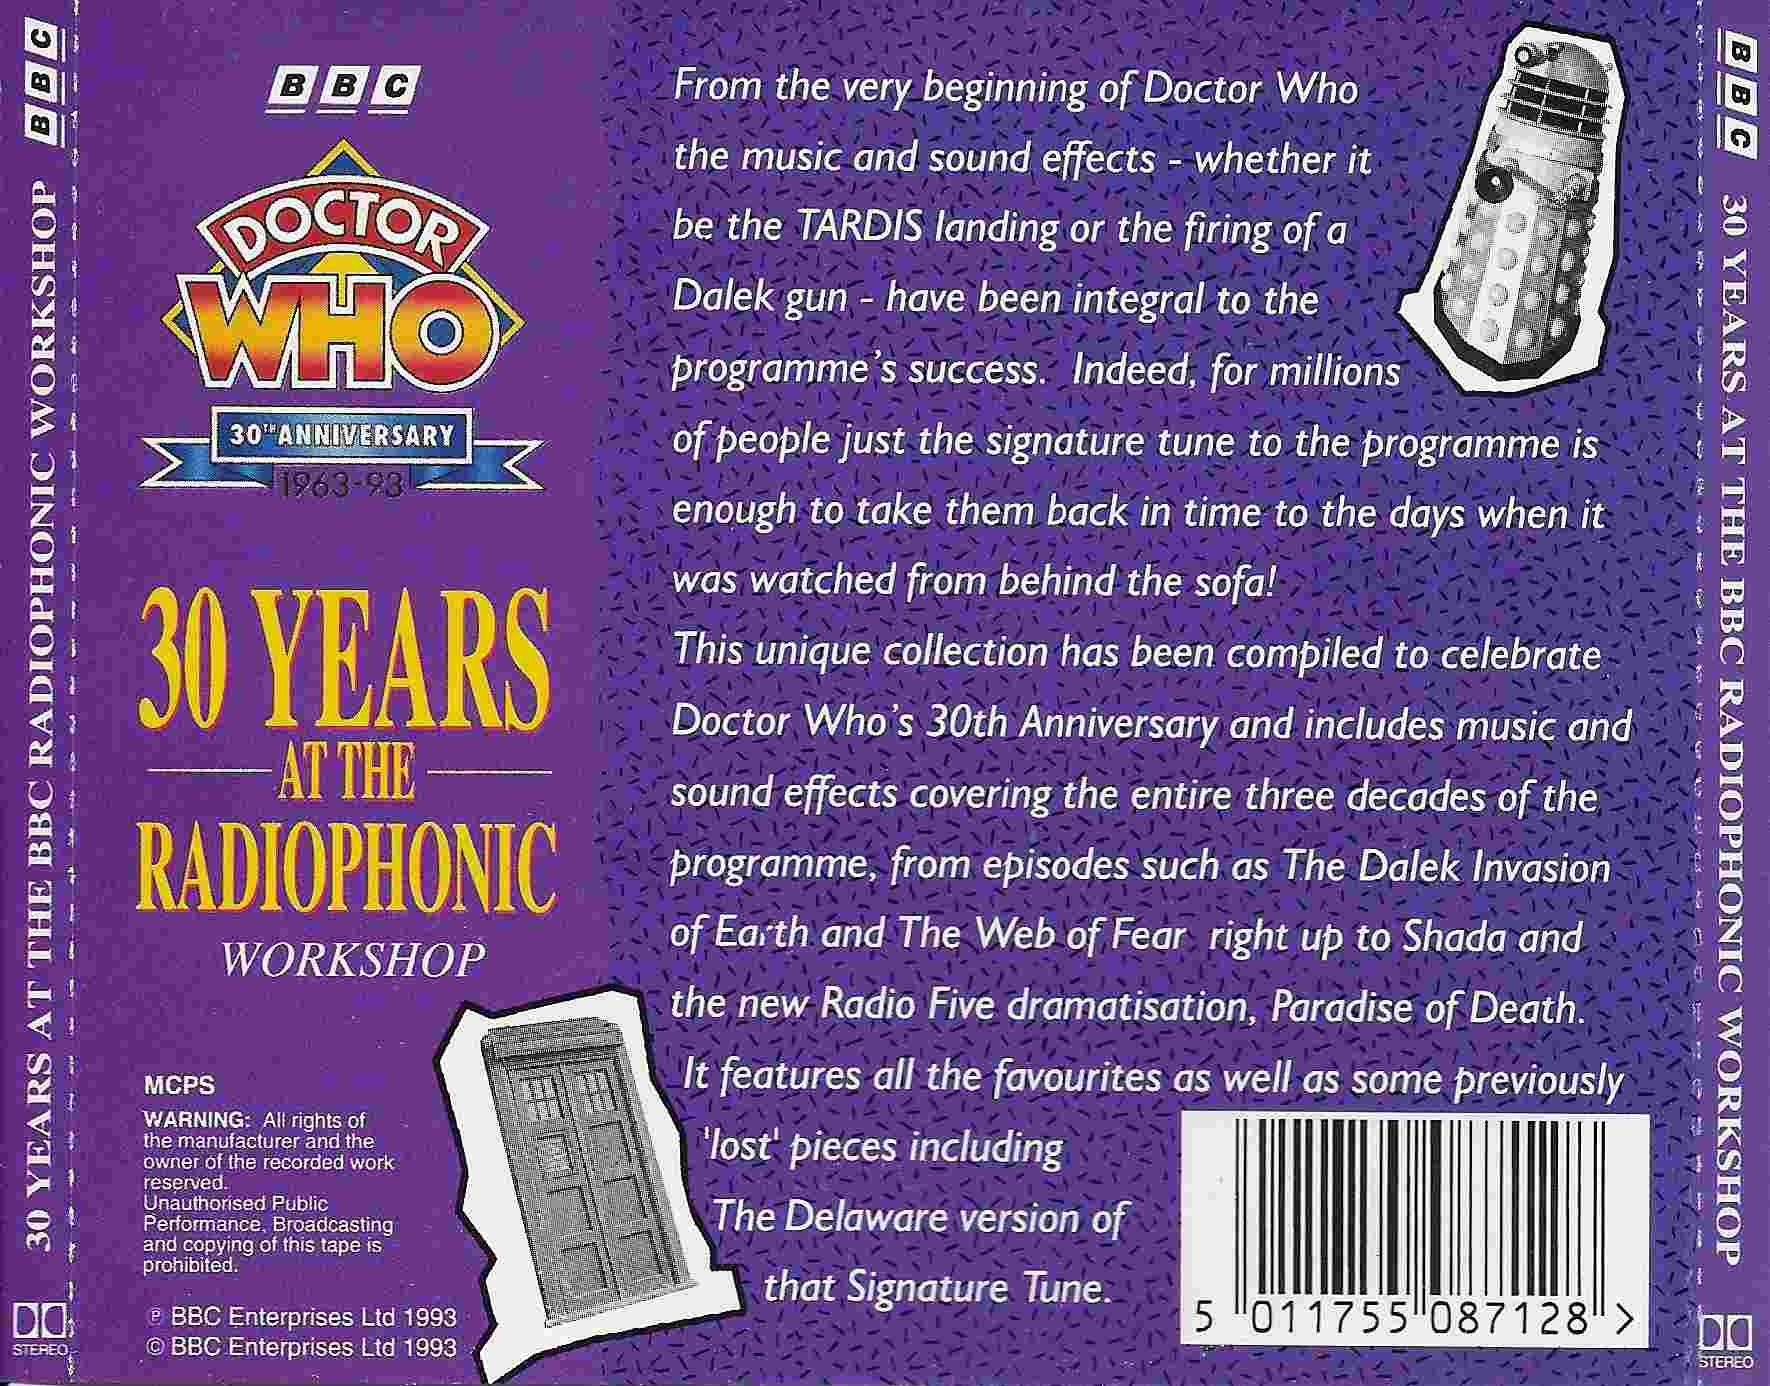 Back cover of BBCCD871